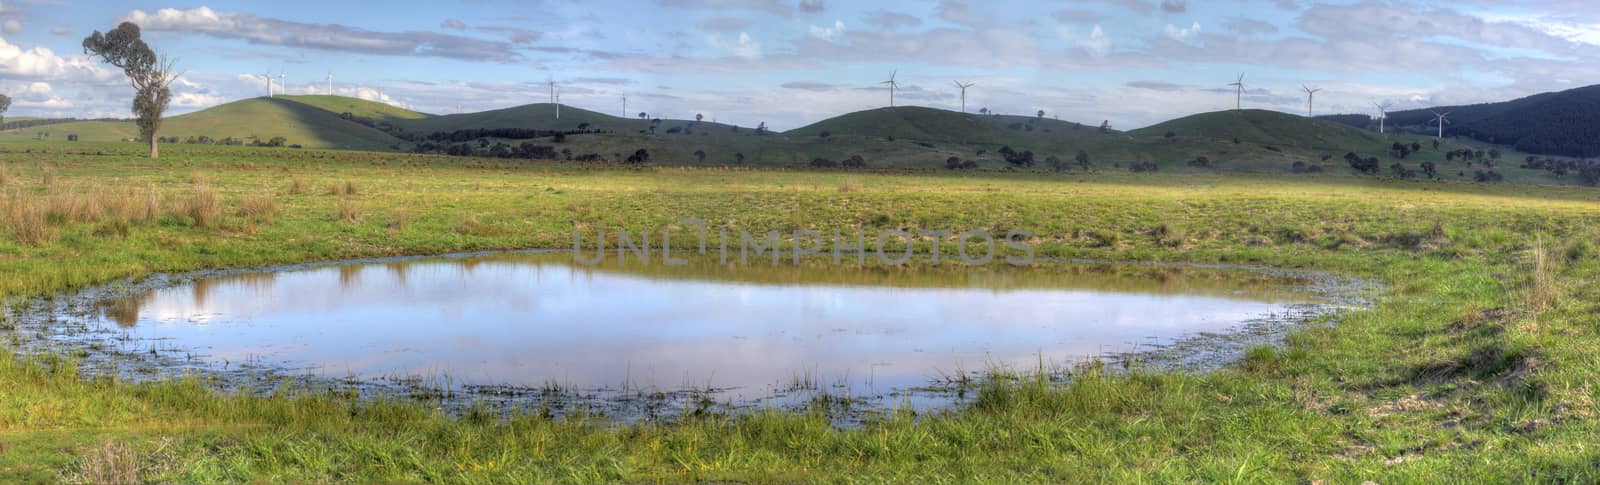 Rural views of picturesque countryside, rolling hills and eco-friendly wind farm and a foreground watering hole